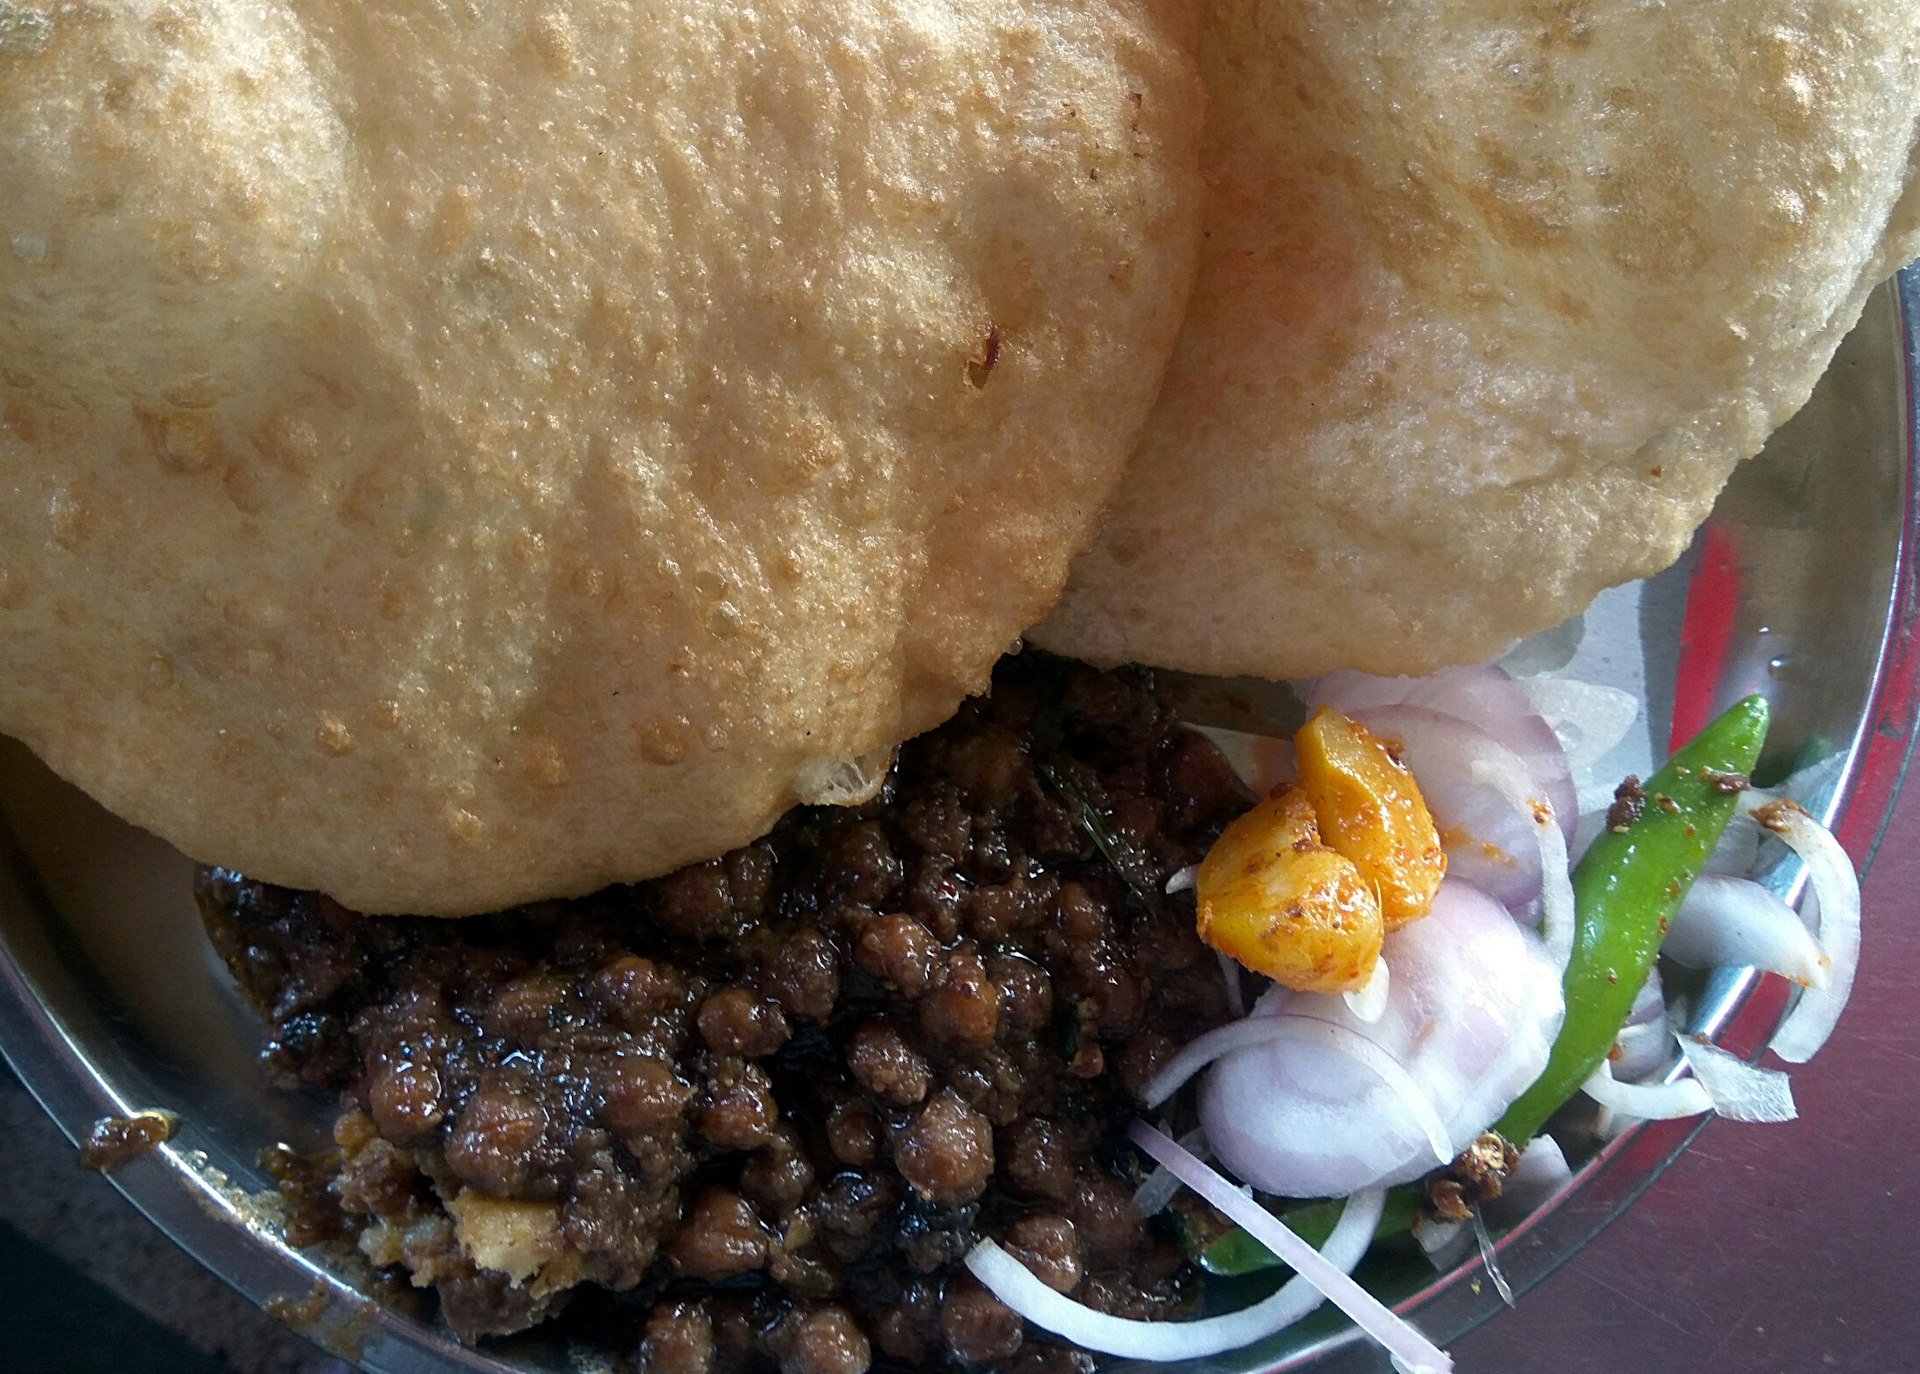 A plate of Chole bhatura – chickpea curry and fried bread stuffed with cottage cheese